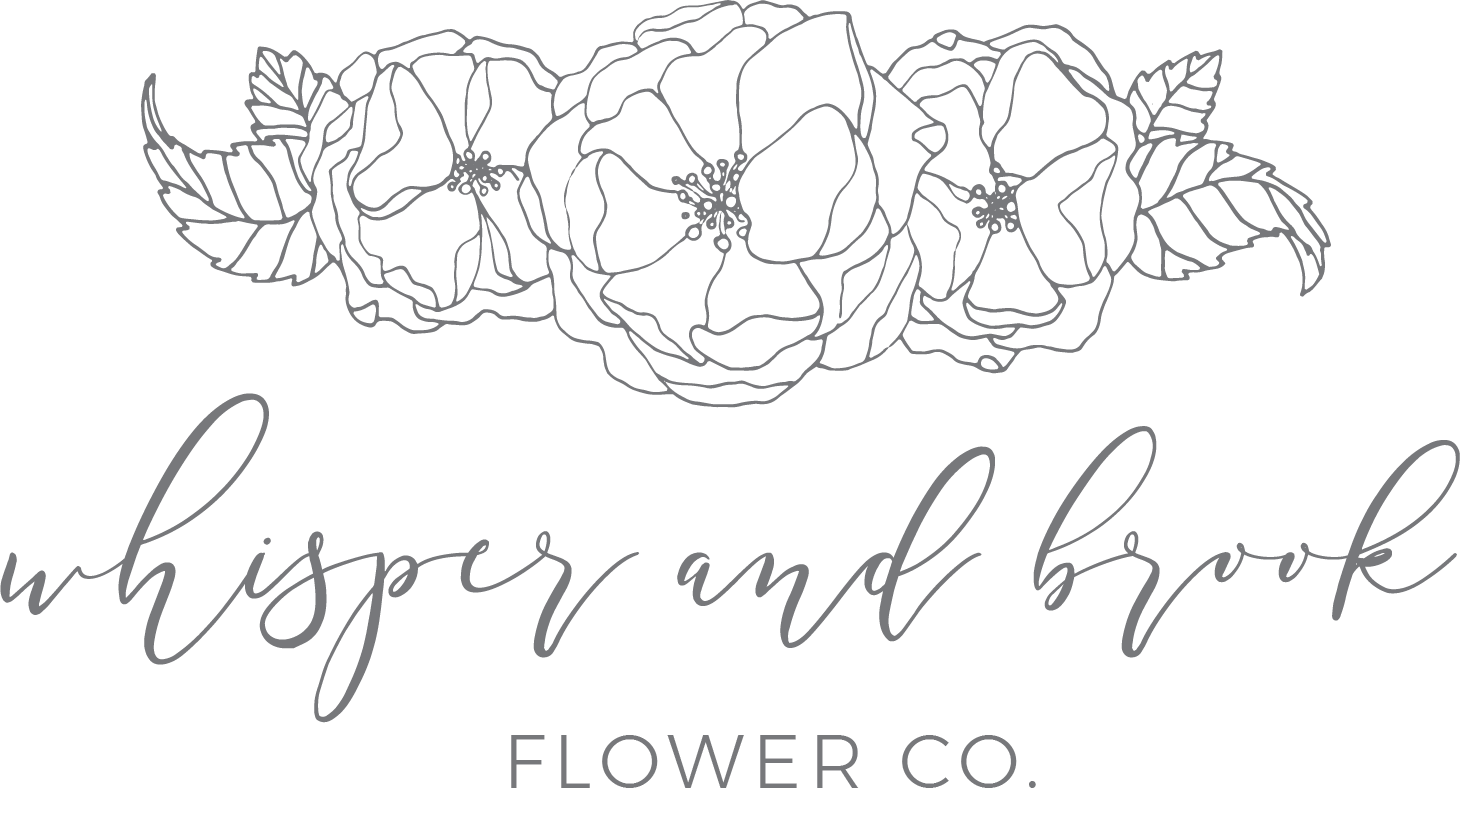 Whisper and Brook Flower Co.